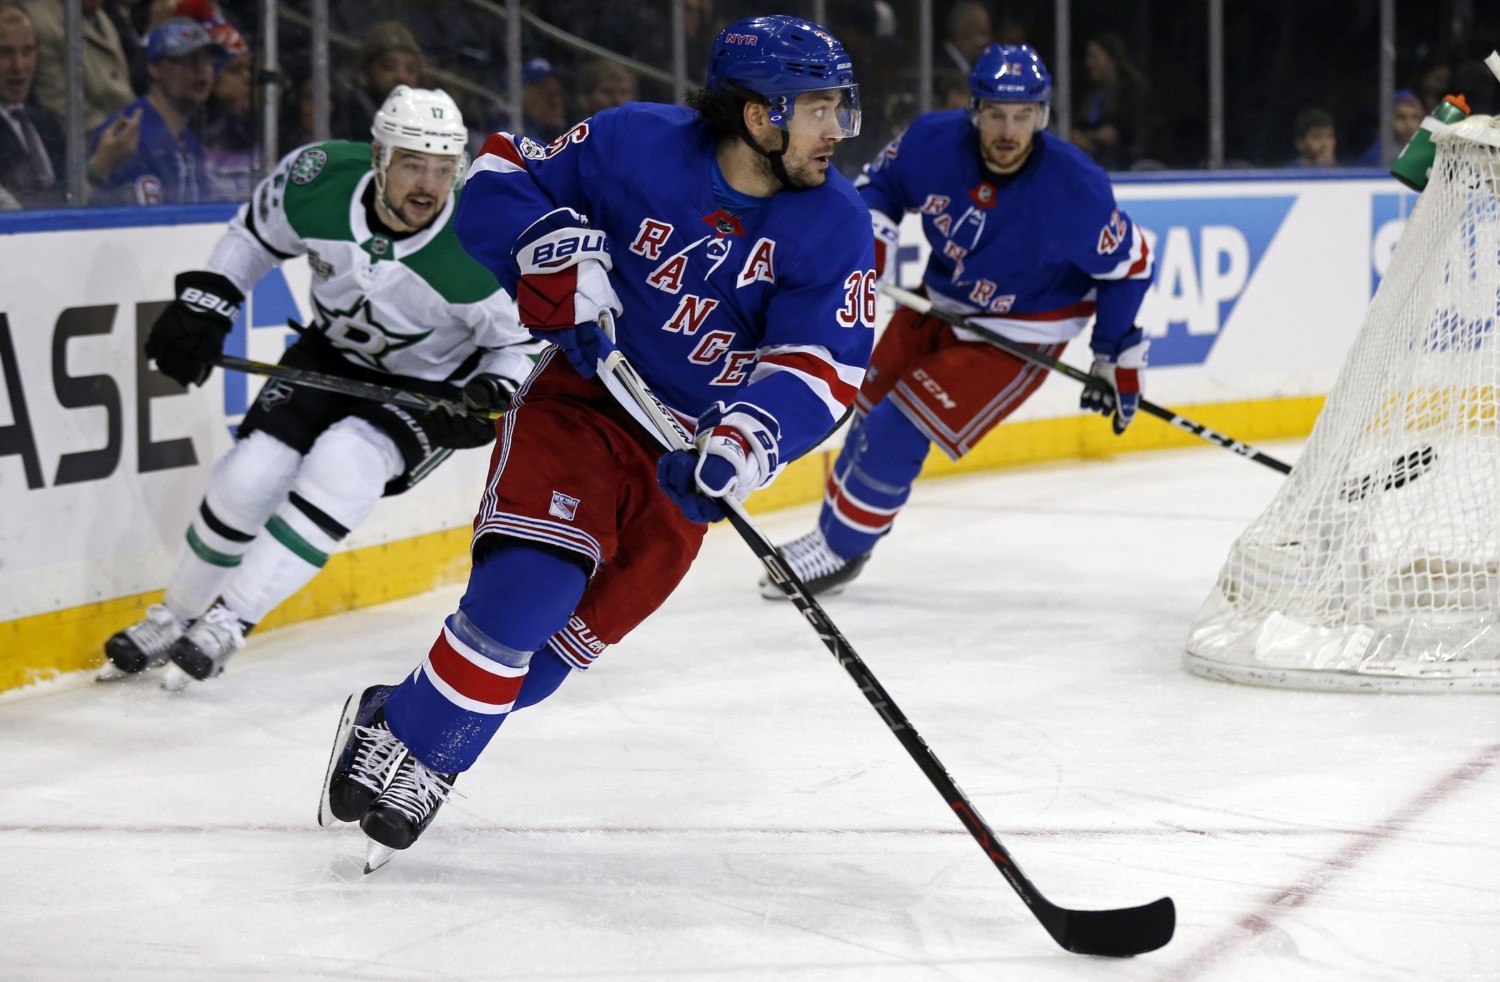 The New York Rangers have traded forward Mats Zuccarello to the Dallas Stars for a conditional 2019 2nd round pick and a conditional 3rd round pick.